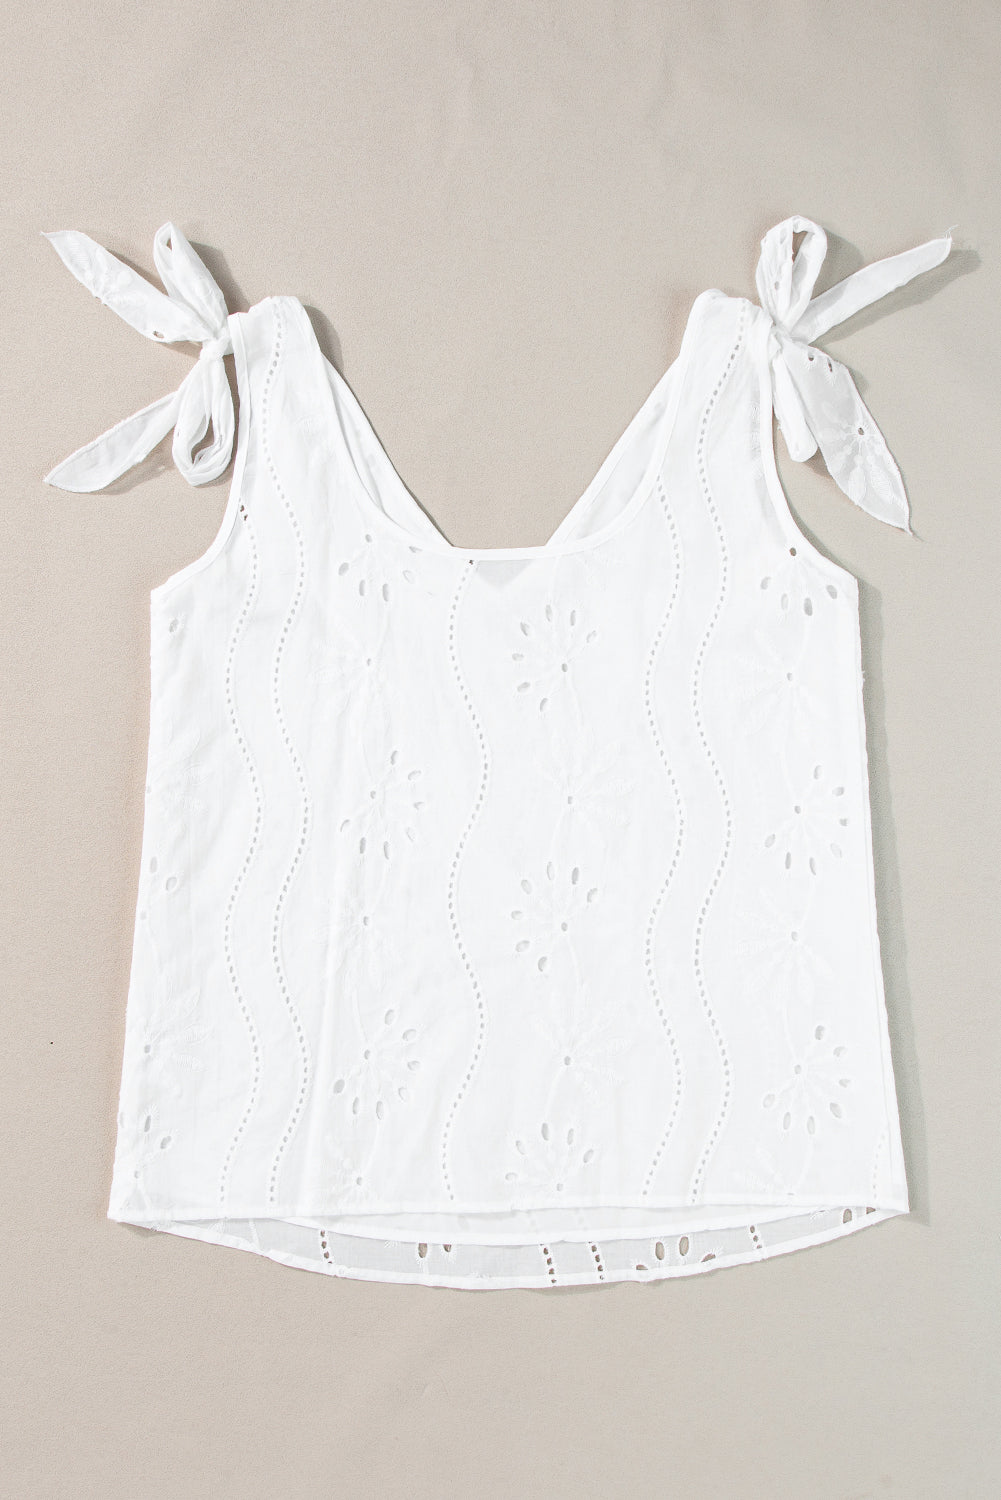 Embroidery Patterned Knotted Straps V-Neck Tank Top